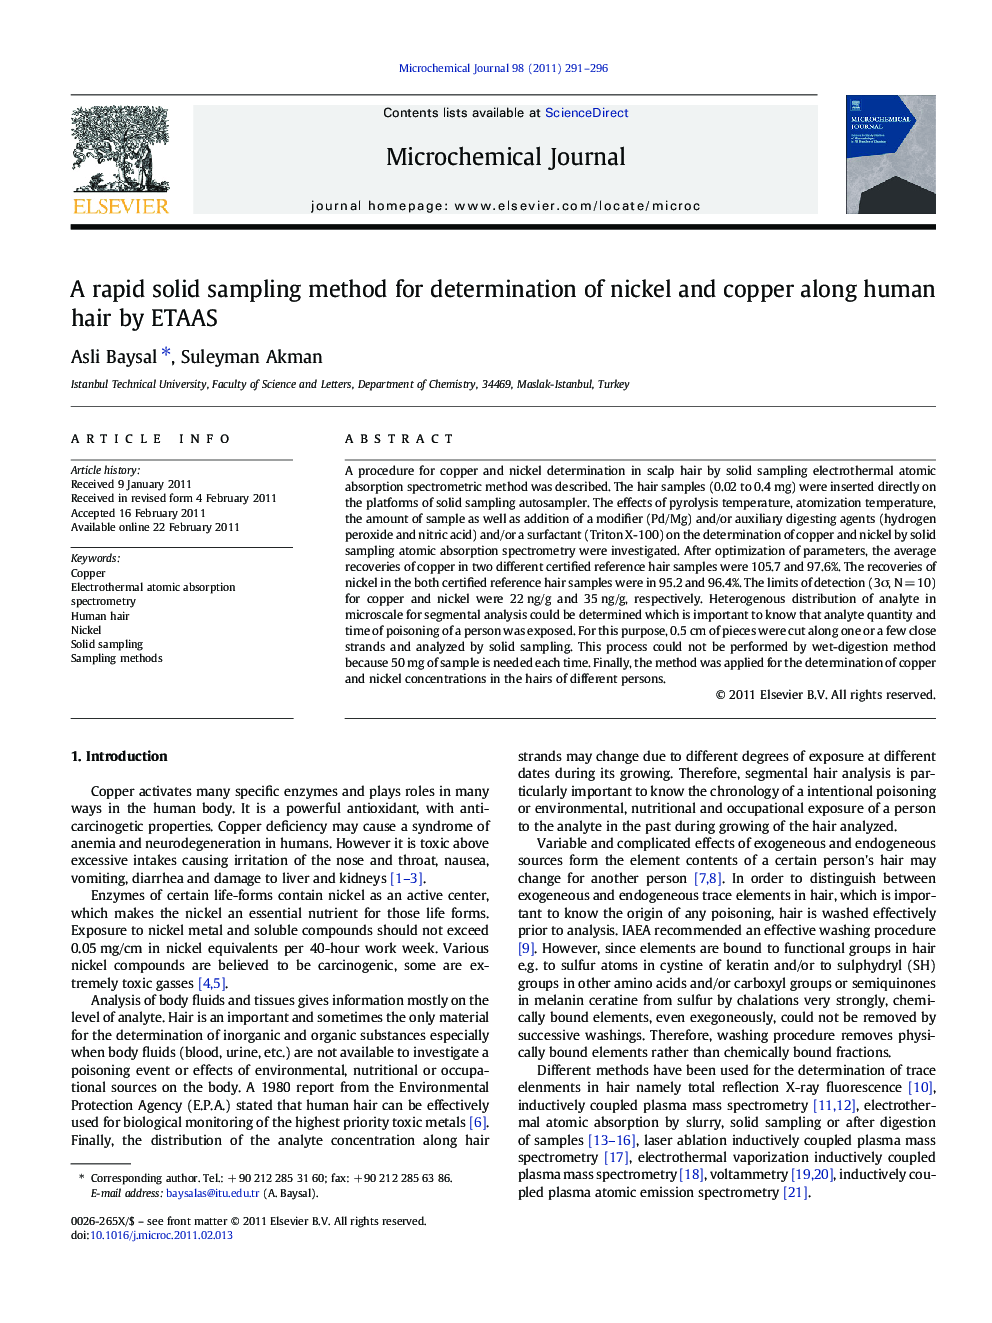 A rapid solid sampling method for determination of nickel and copper along human hair by ETAAS